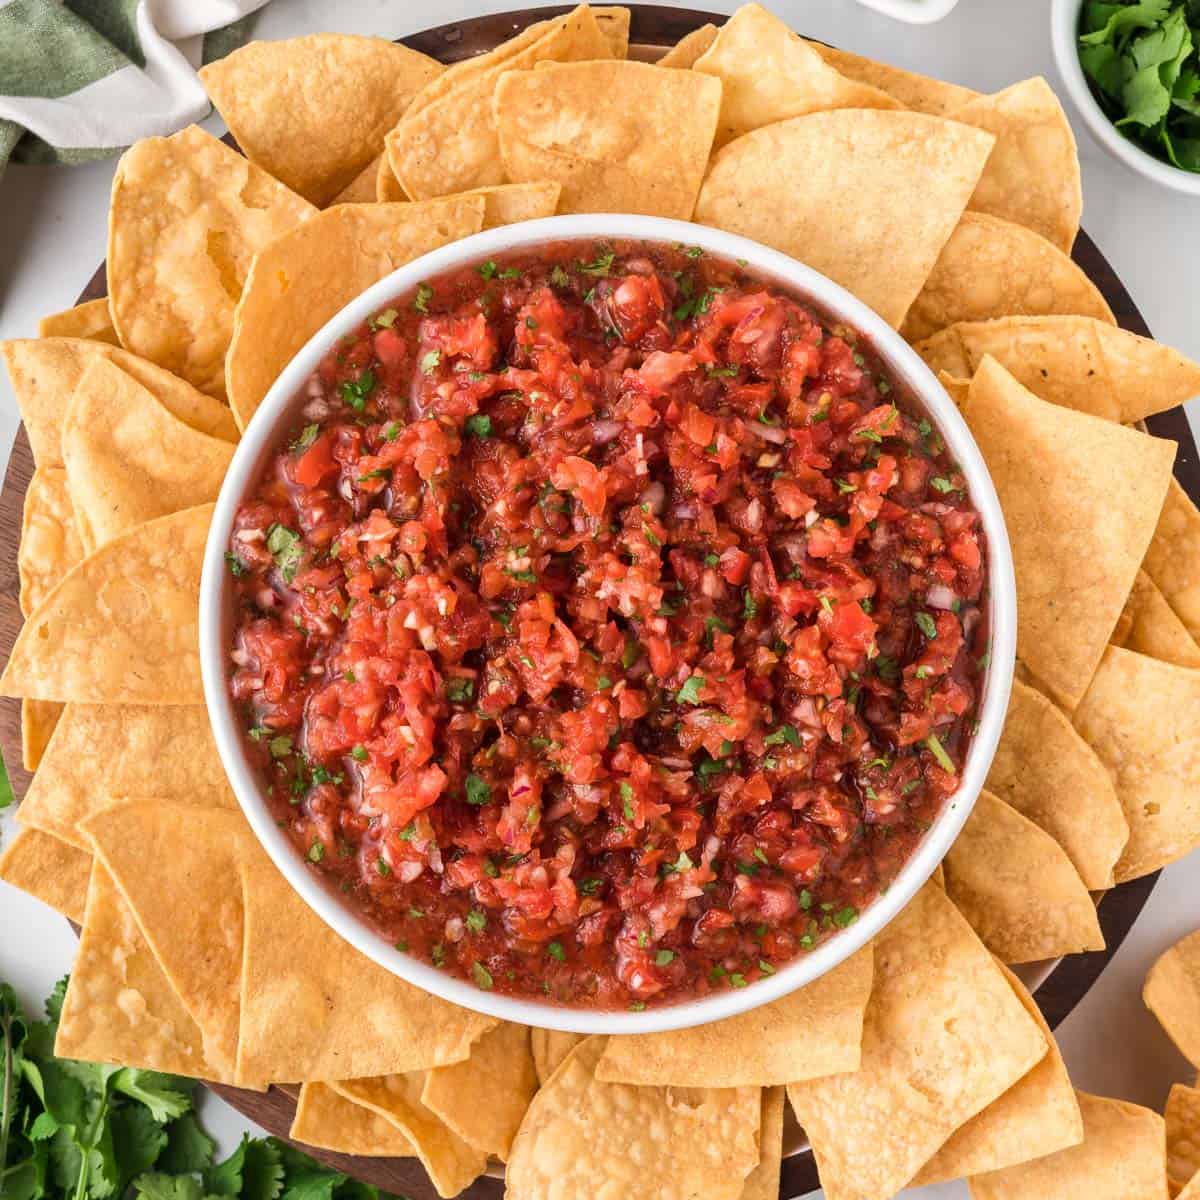 salsa in a bowl surrounded by a platter of tortilla chips